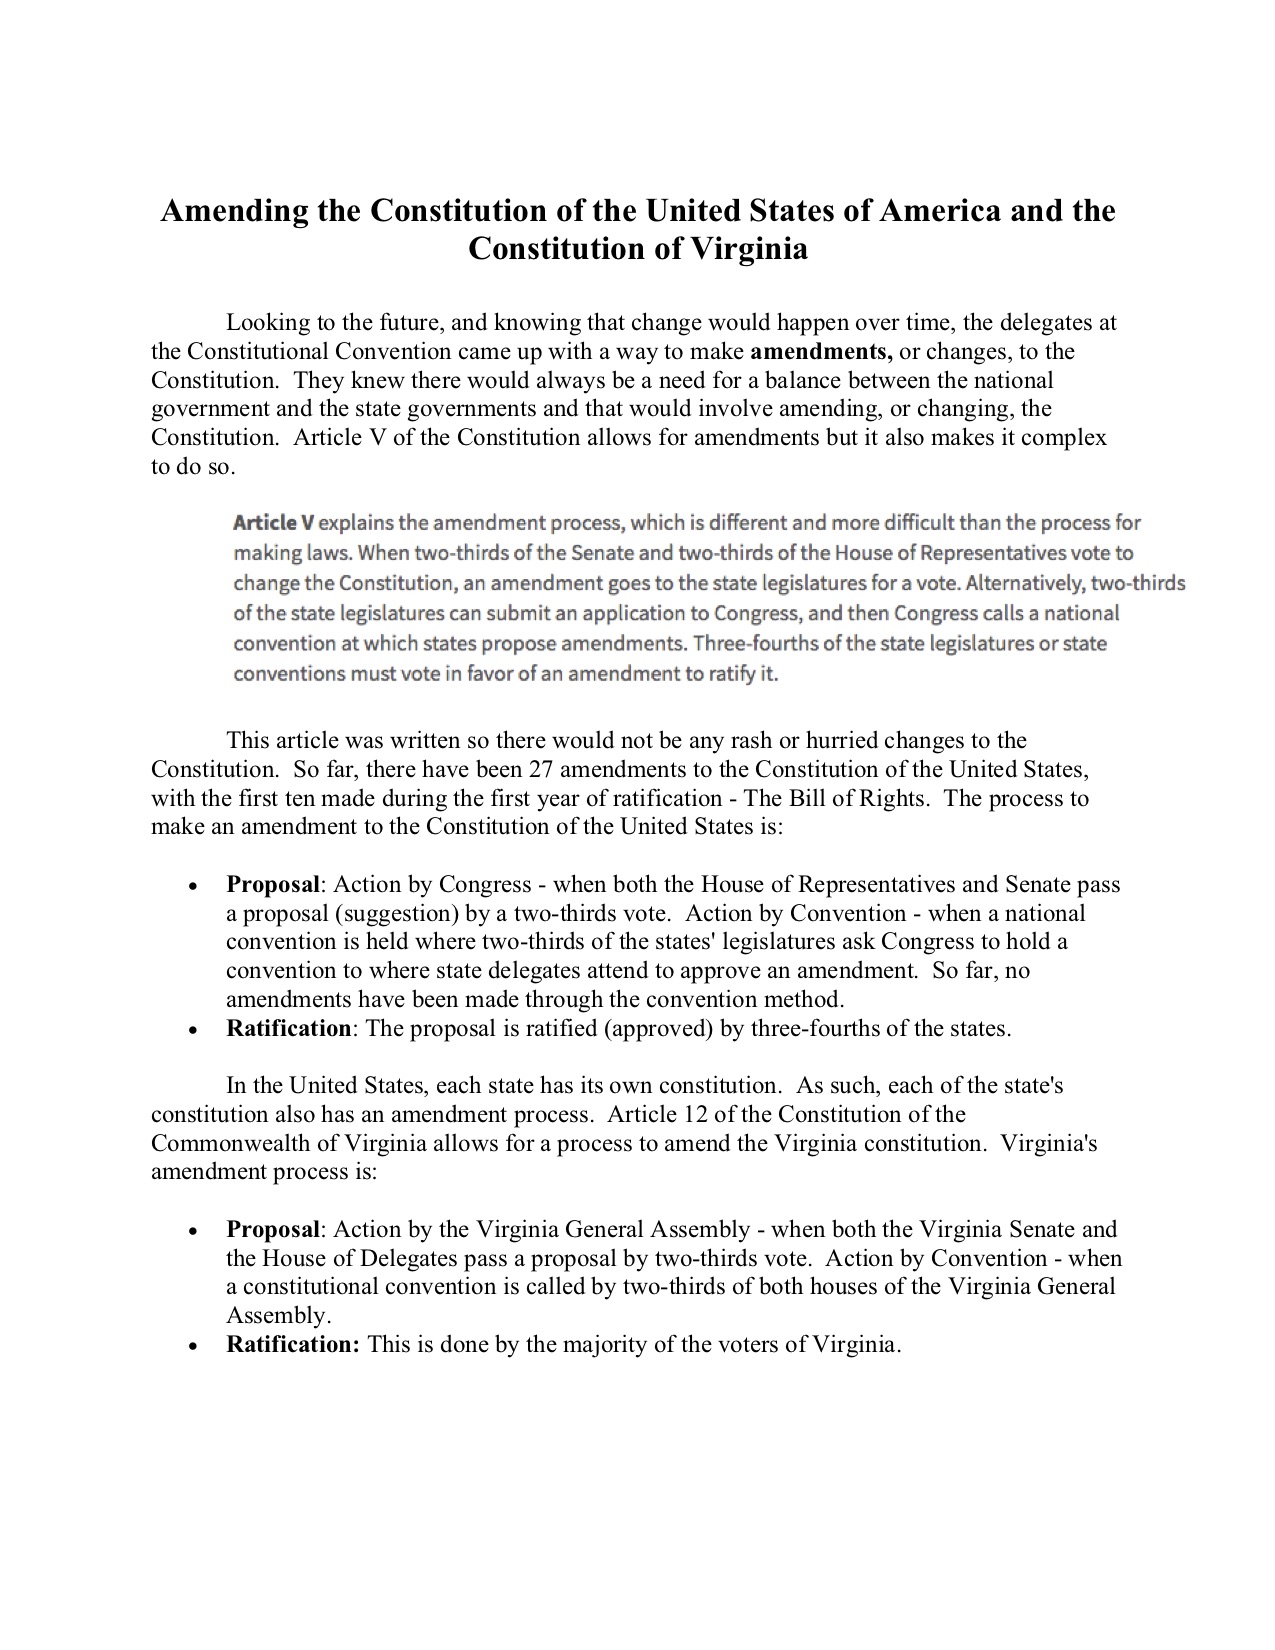 Brief description of the amendment process of the Constitution of the United States and the Constitution of Virginia.